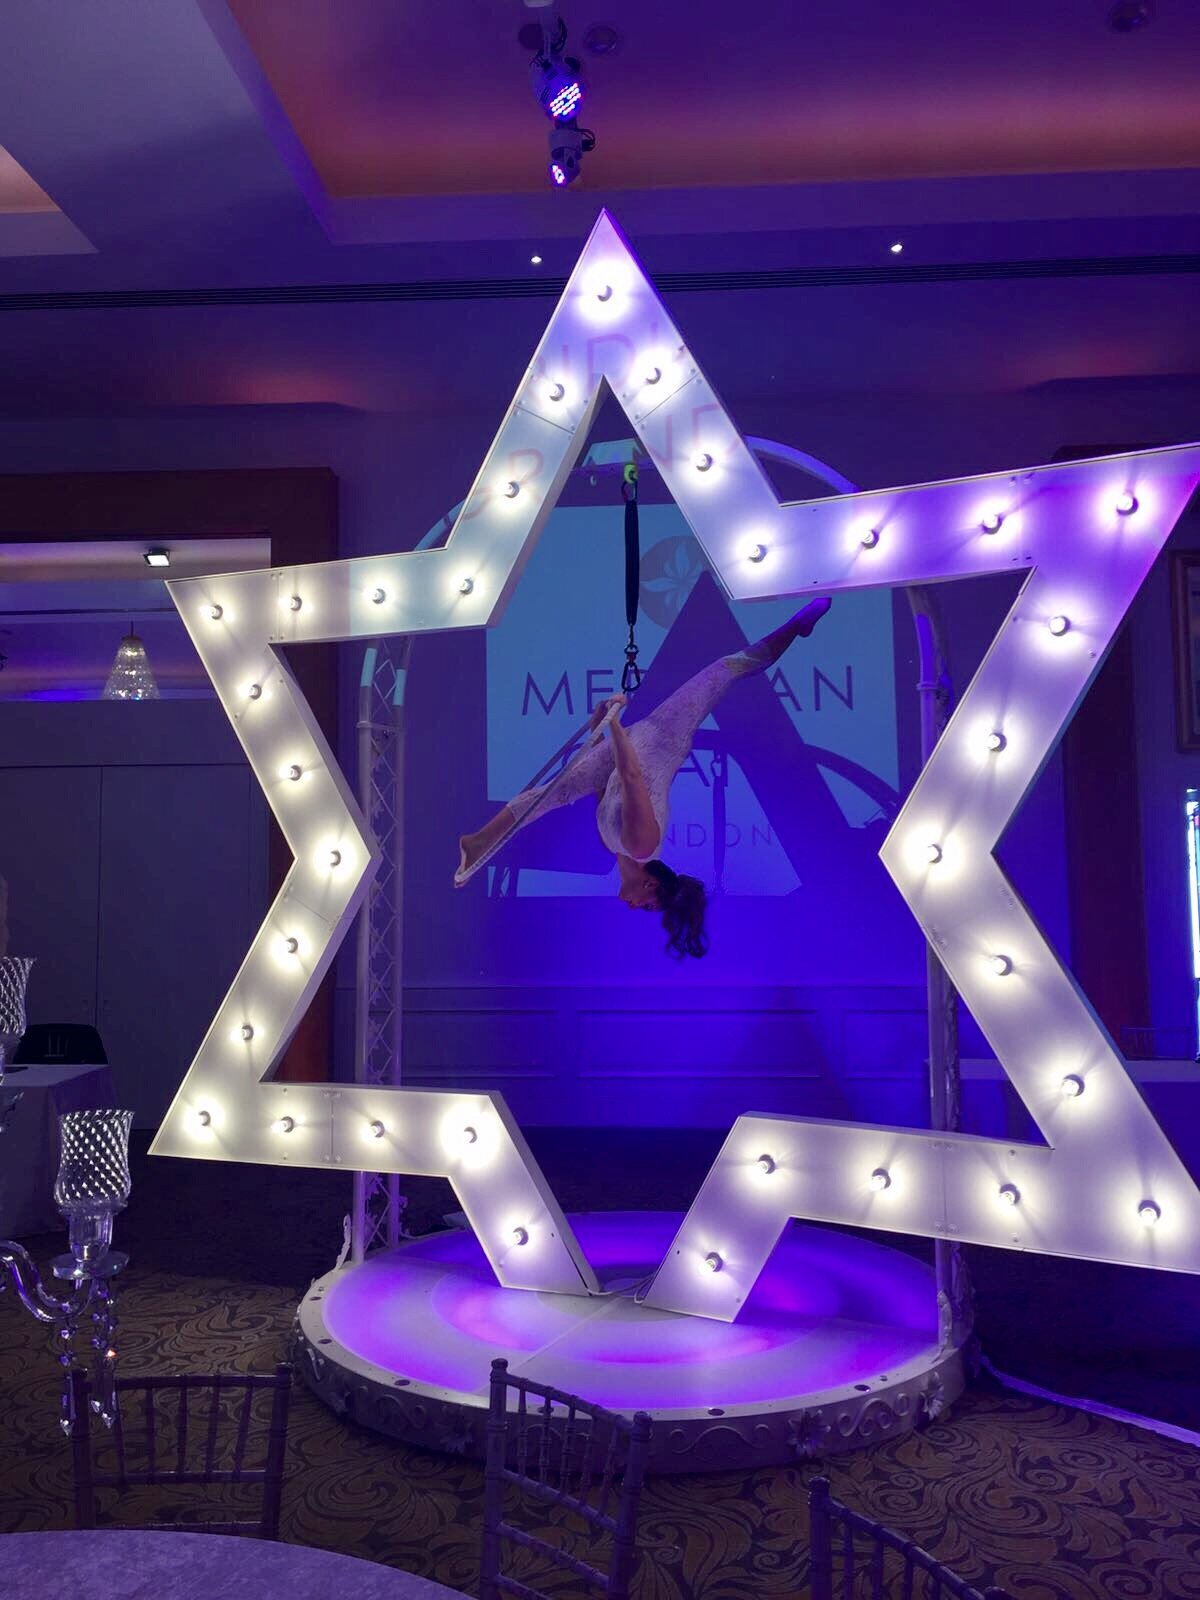 Giant LED star at event